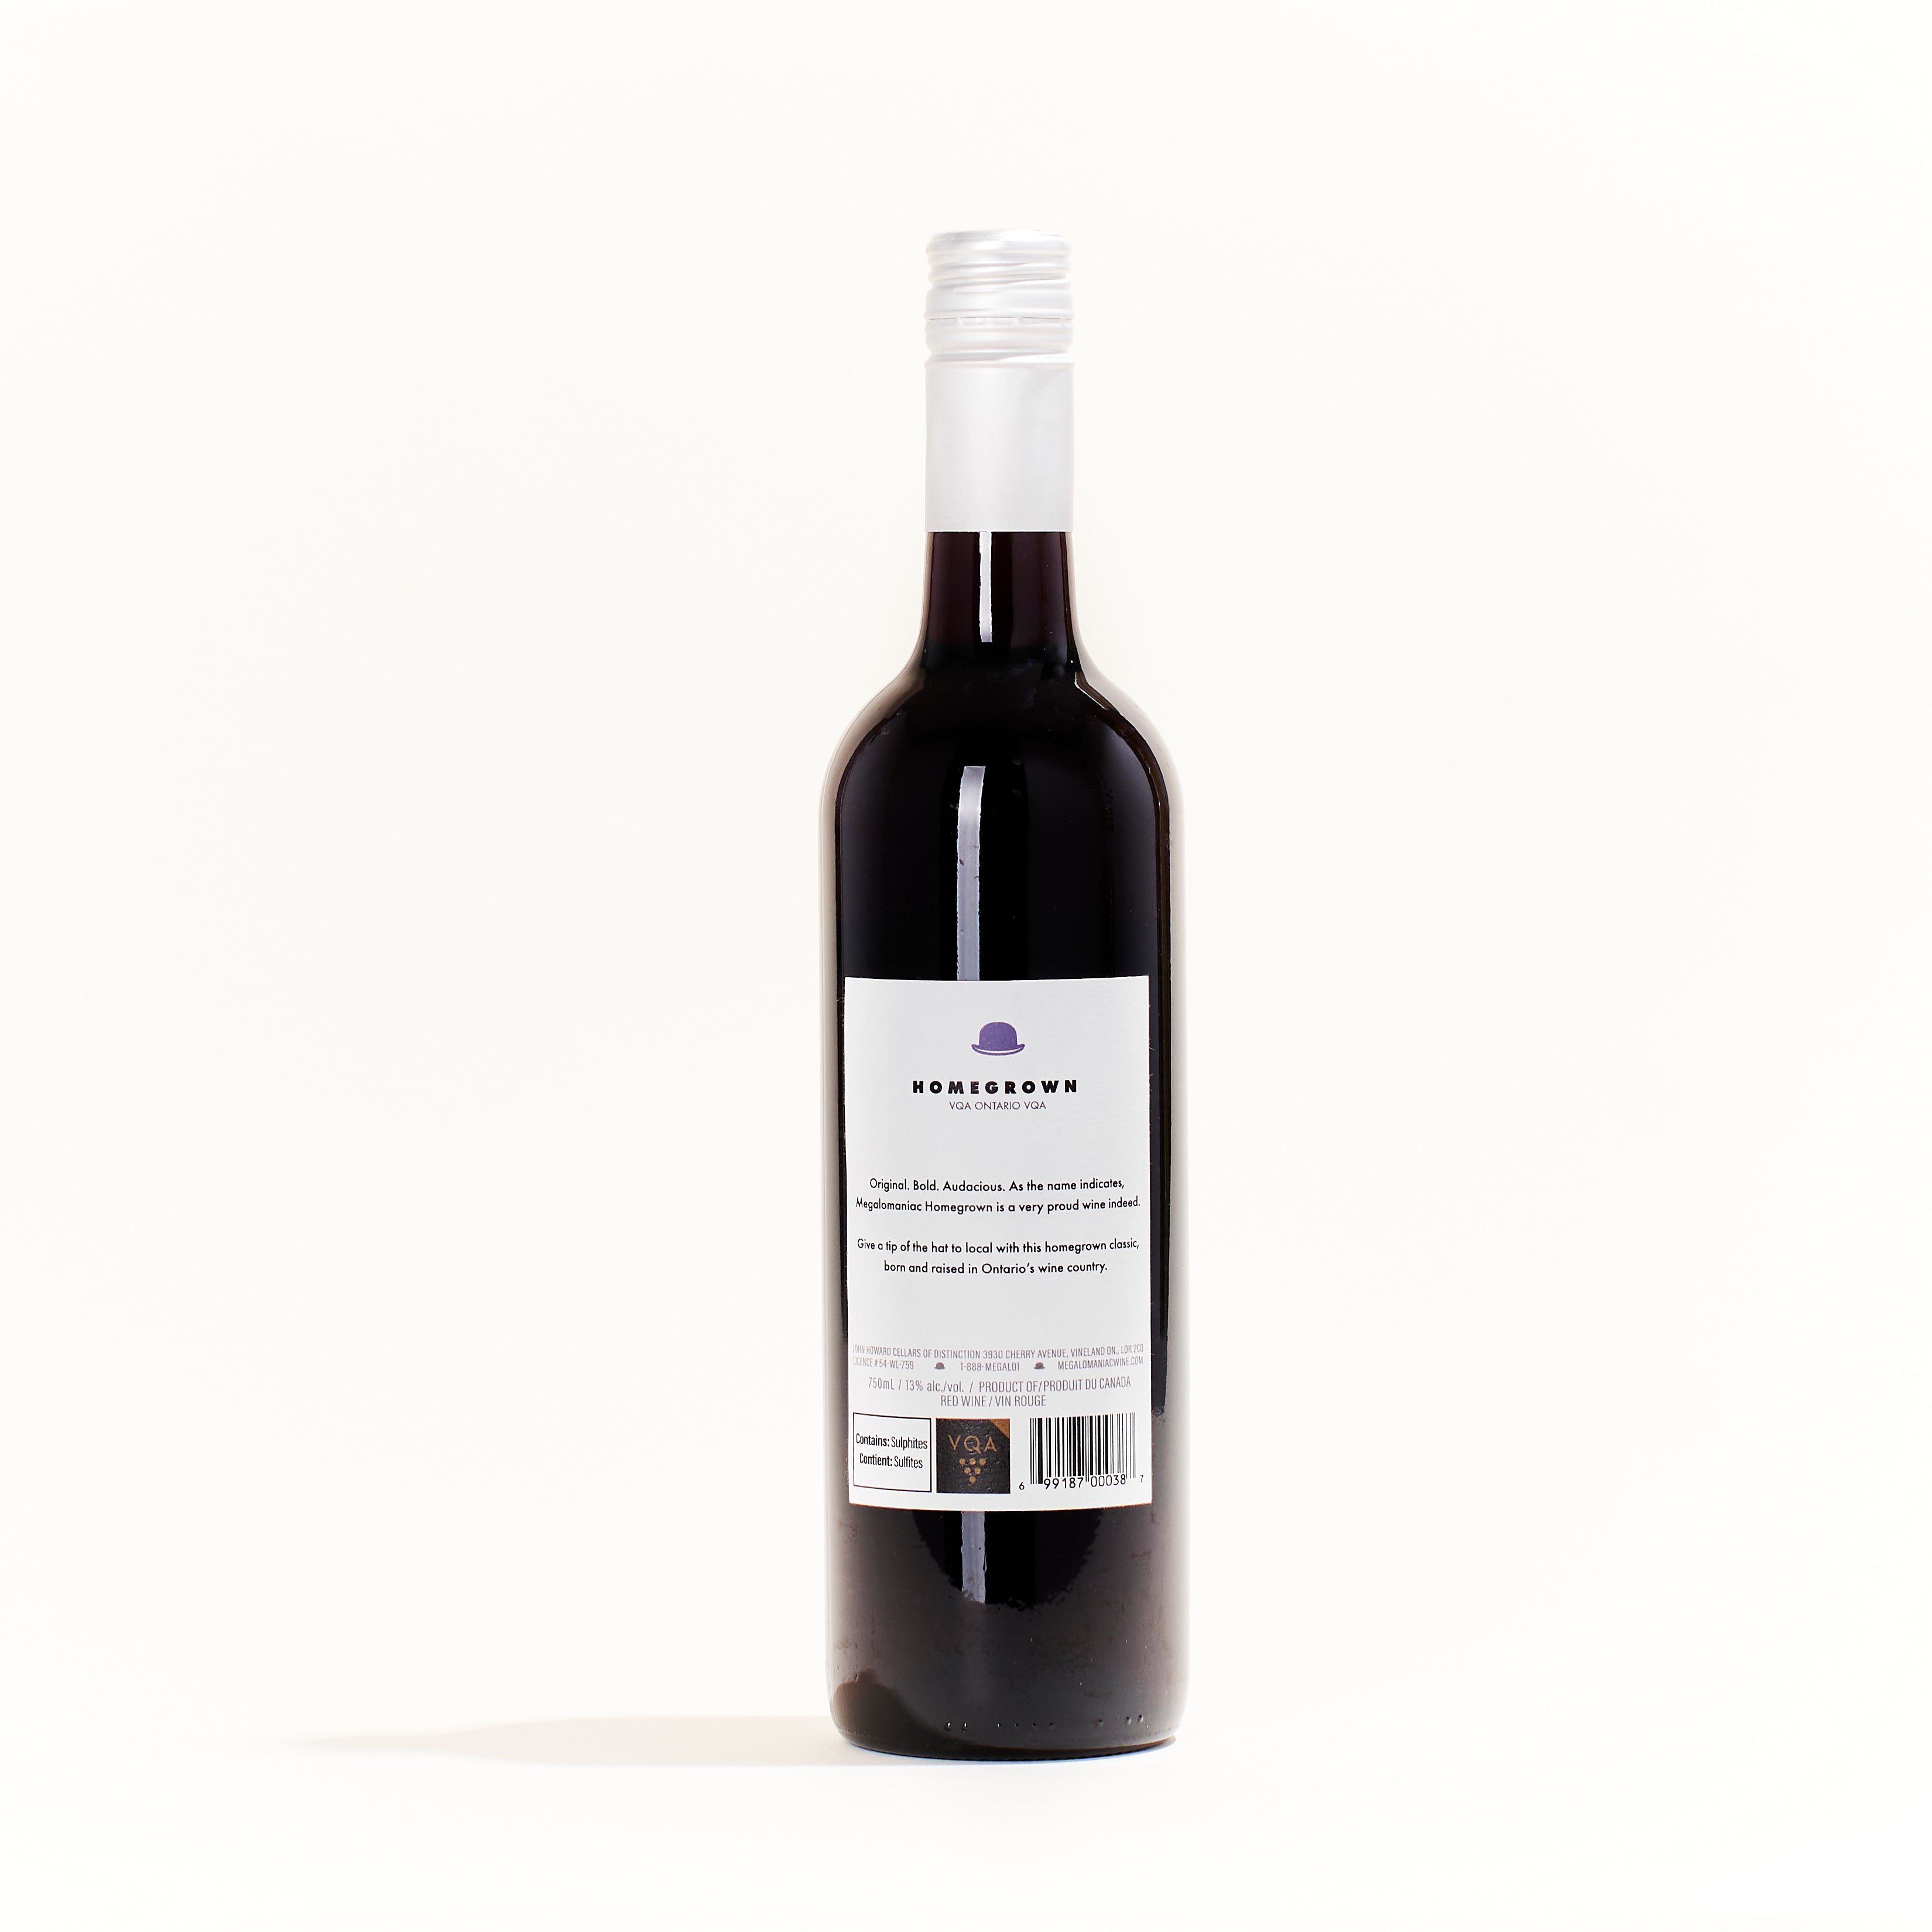 Homegrown Red Blend, by Megalomaniac, is a natural Red from Ontario, Canada. Made from Cabernet Sauvignon, Merlot, Cabernet Franc, Malbec, Petit Verdot grapes